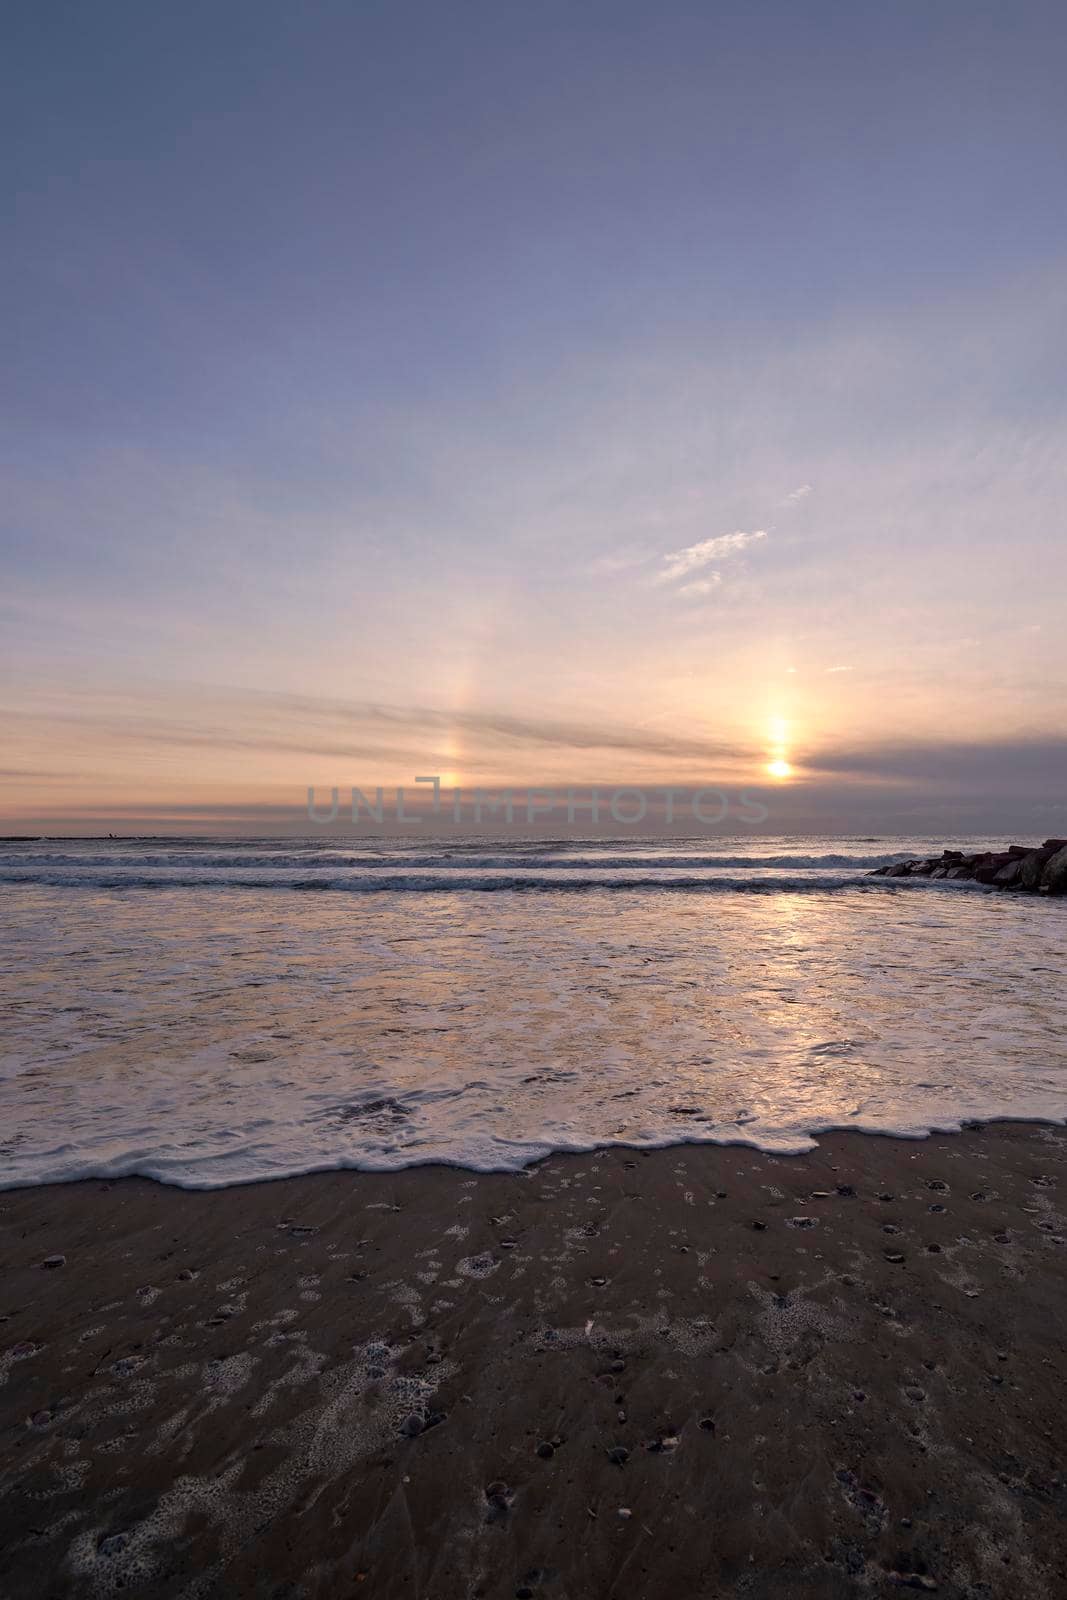 Sunrise from the beach with a breakwater. Rainbow, Circle around the sun, clouds and blue sky, waves, calm sea